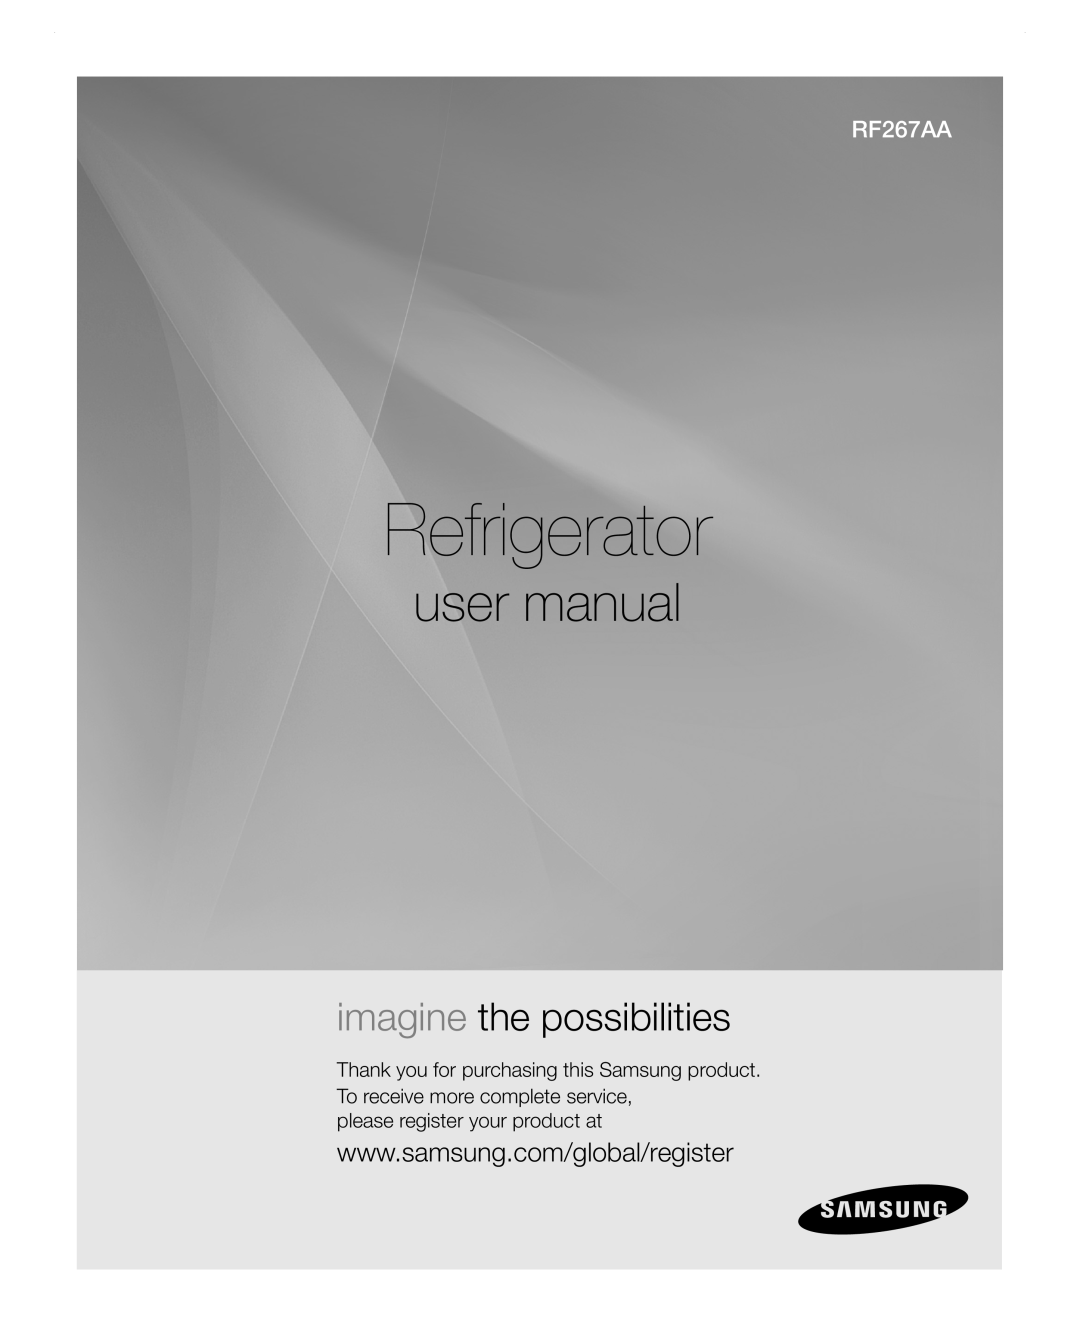 Samsung RF267AA user manual please register your product at, Refrigerator, imagine the possibilities 